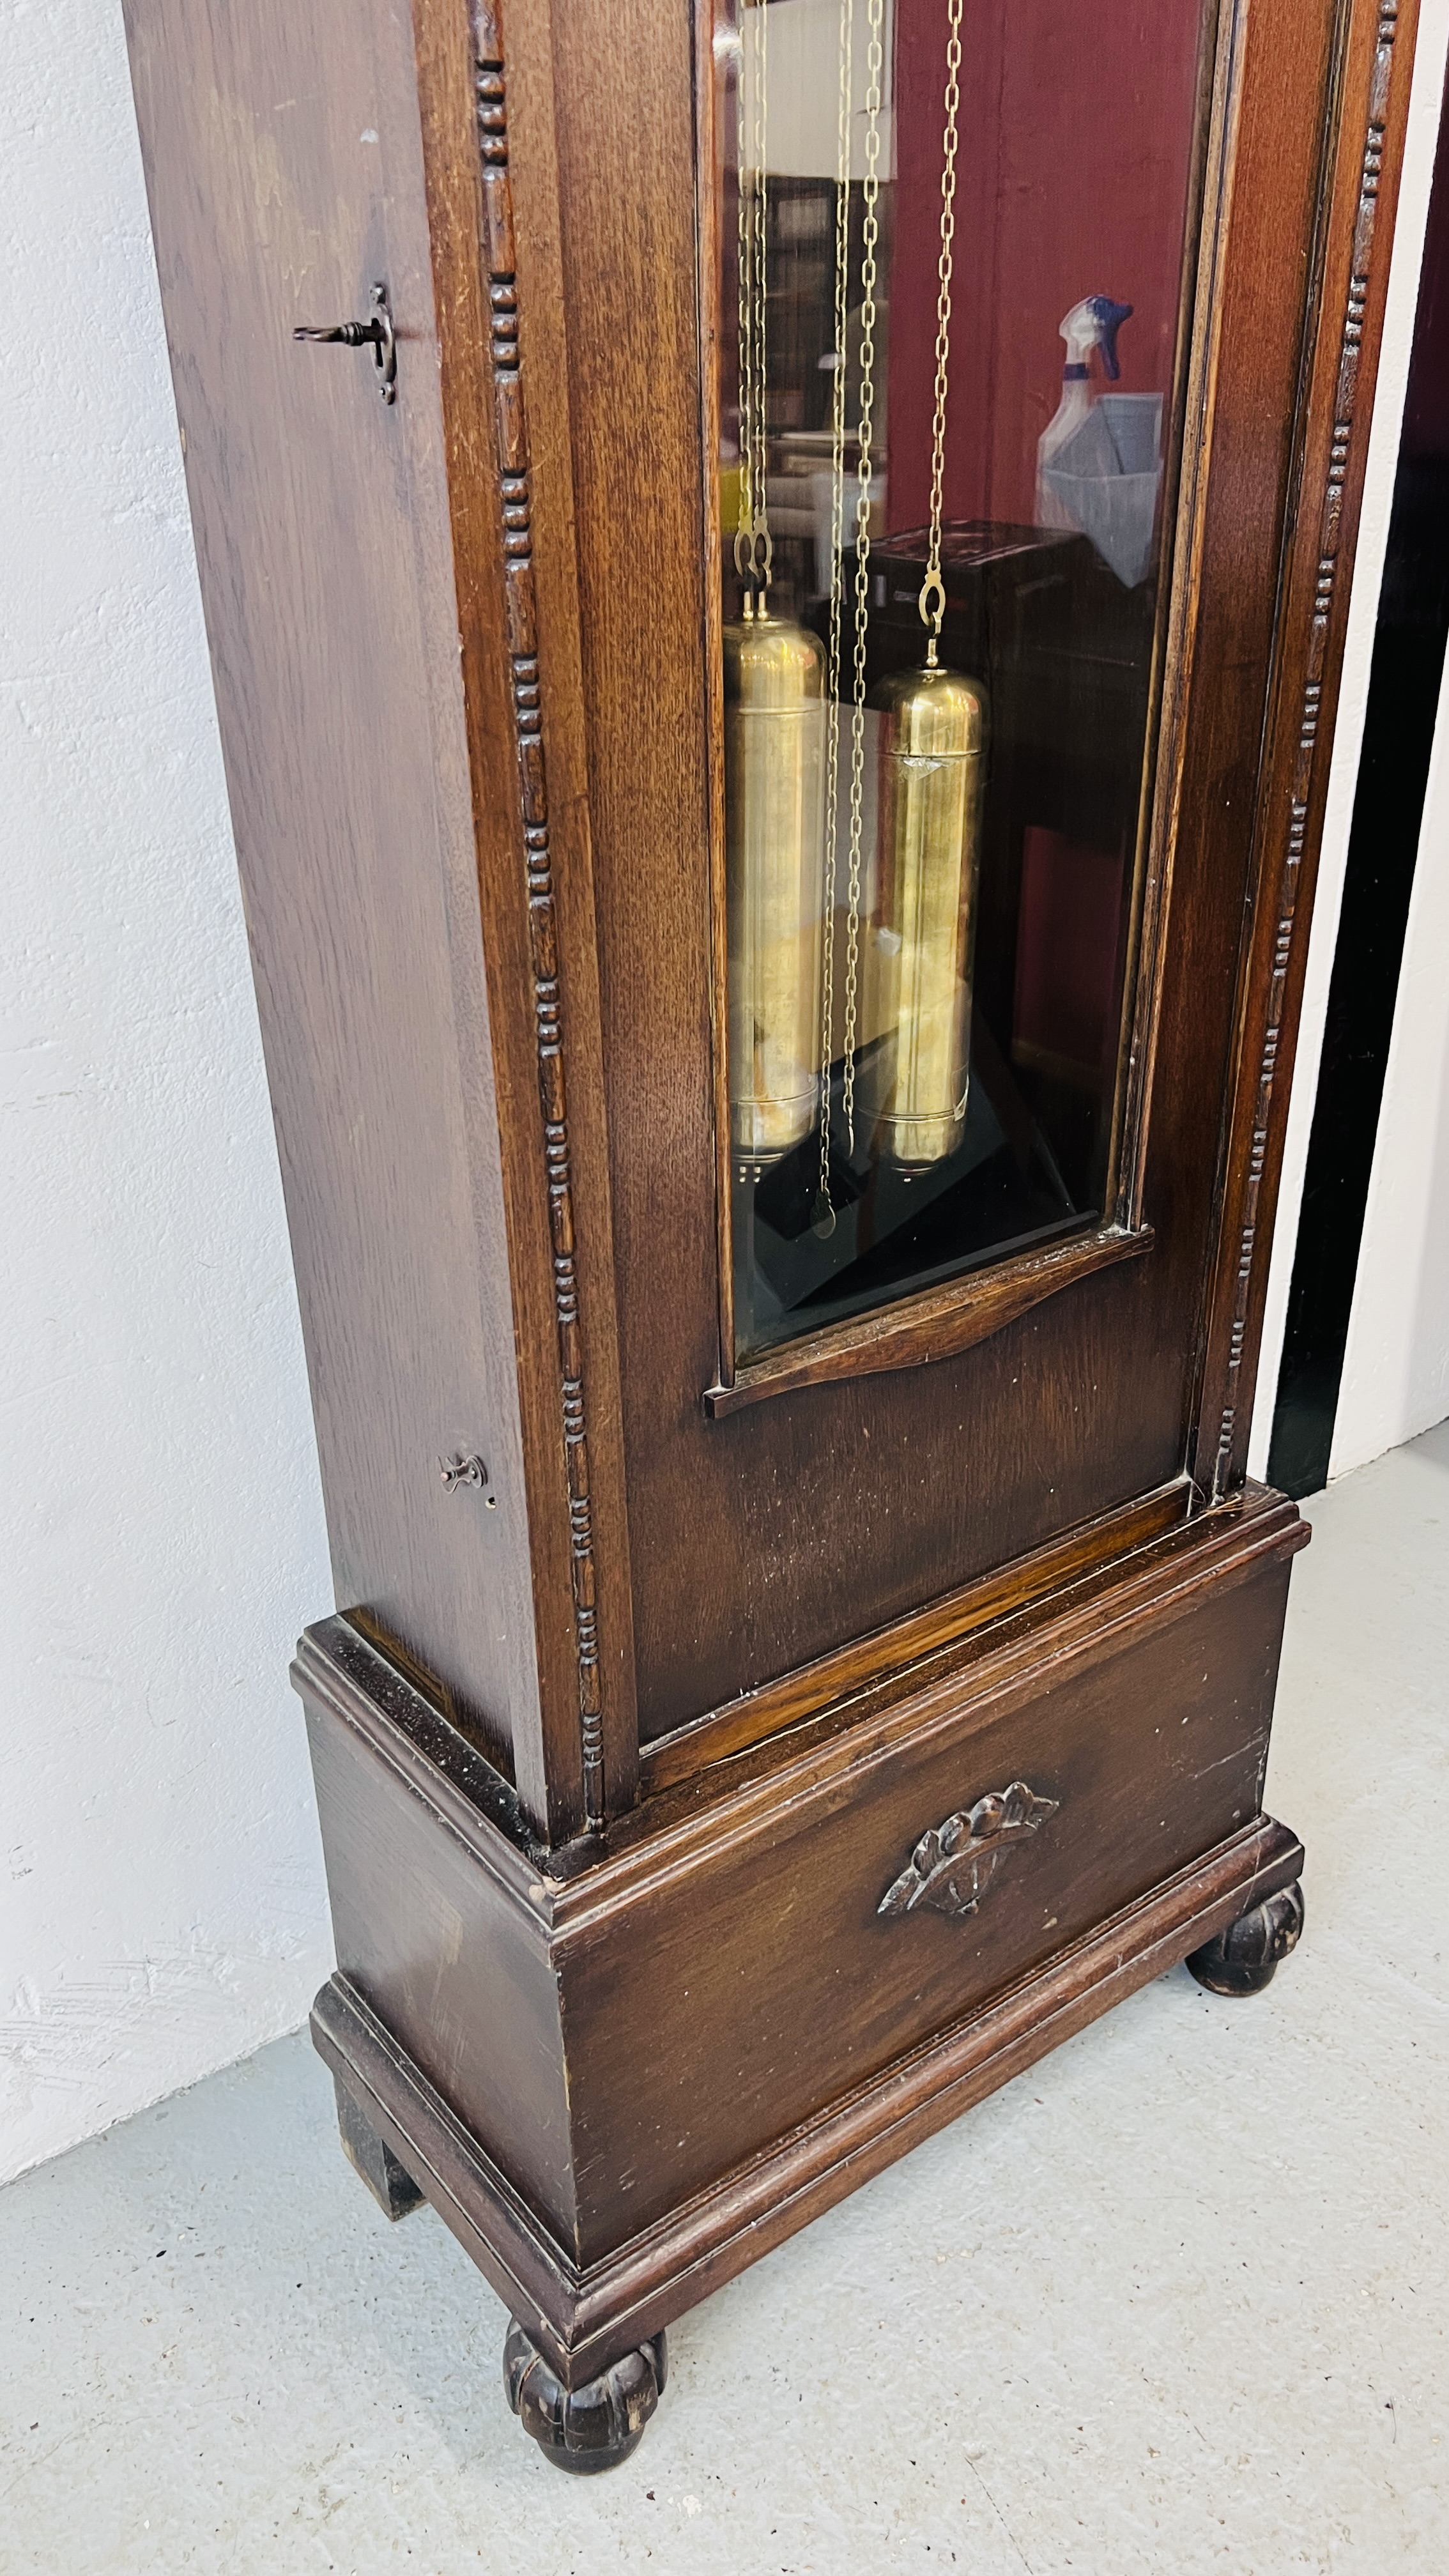 A 1930's WESTMINSTER CHIMING WEIGHT DRIVEN LONG CASE CLOCK HEIGHT 199CM. - Image 6 of 6